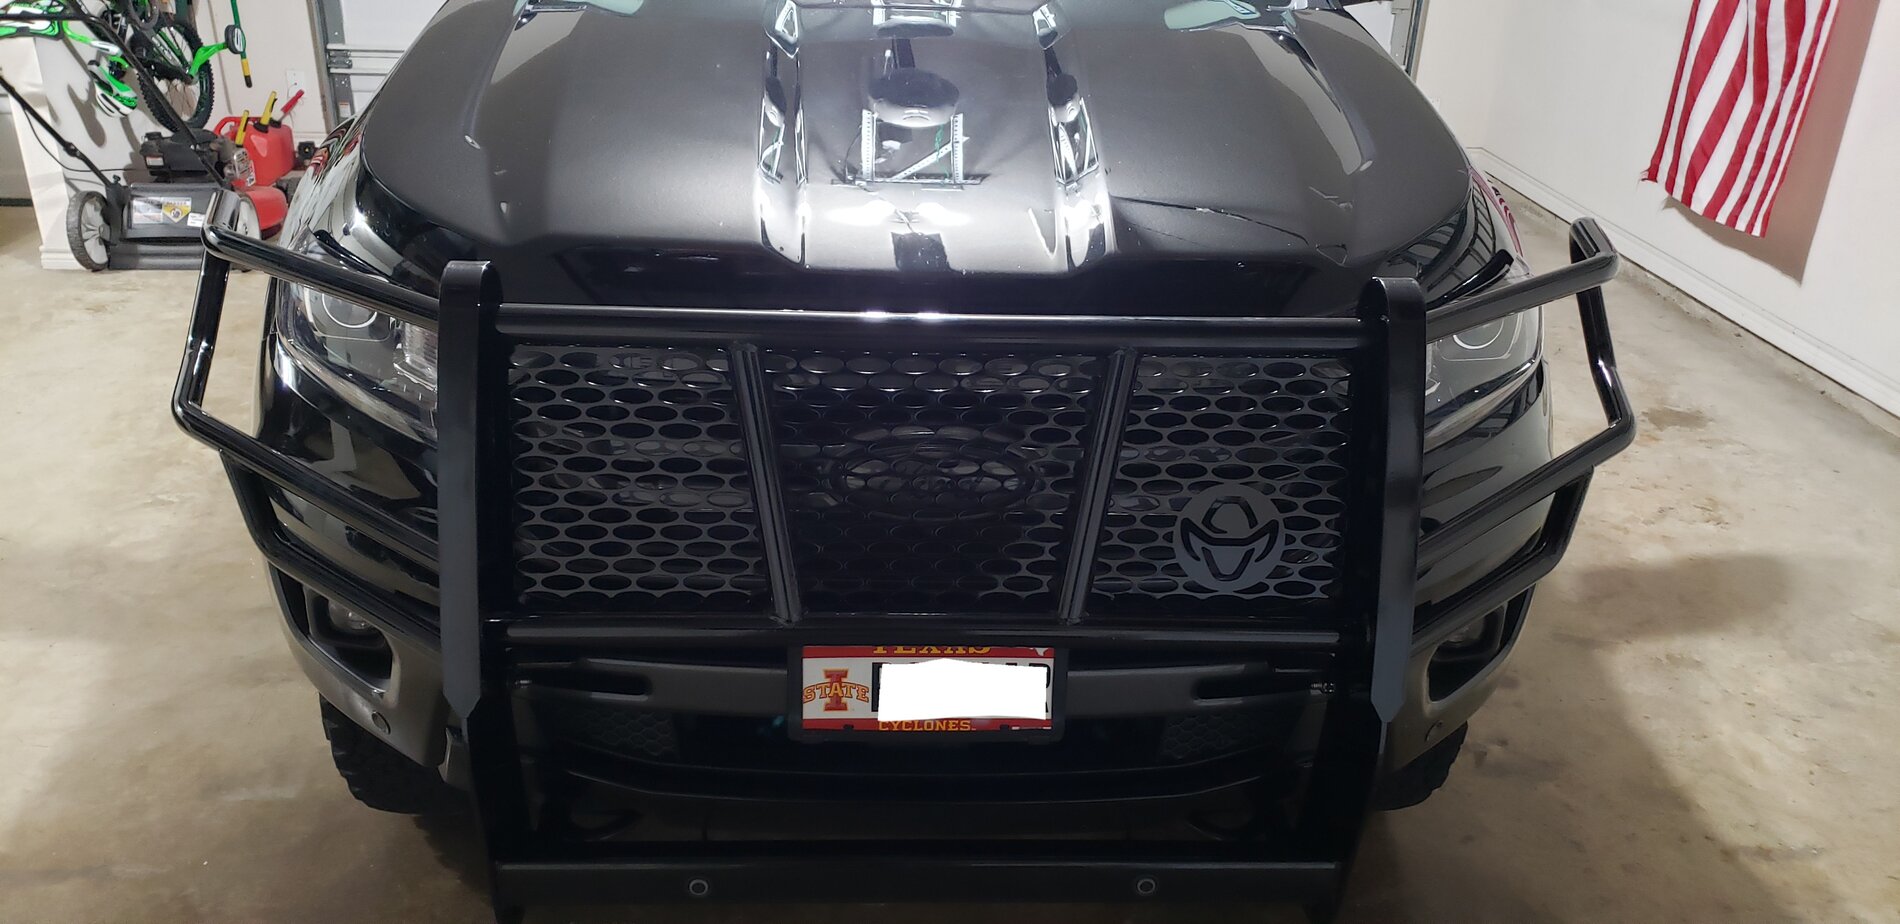 Brush Guard | Page 5 | 2019+ Ford Ranger and Raptor Forum (5th ...